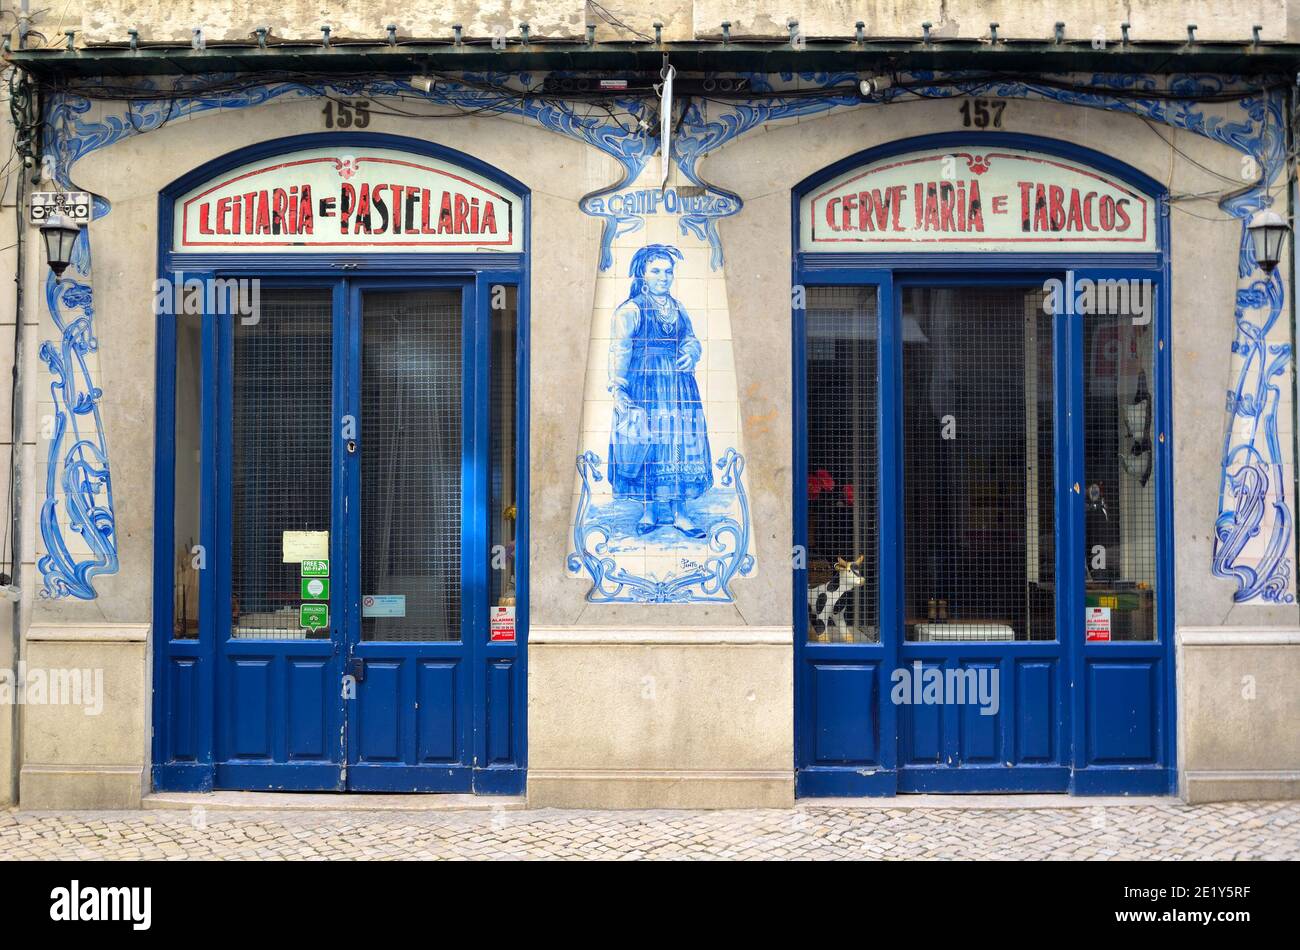 Old traditional store front with ceramic tiles in Lisbon Portugal. Stock Photo